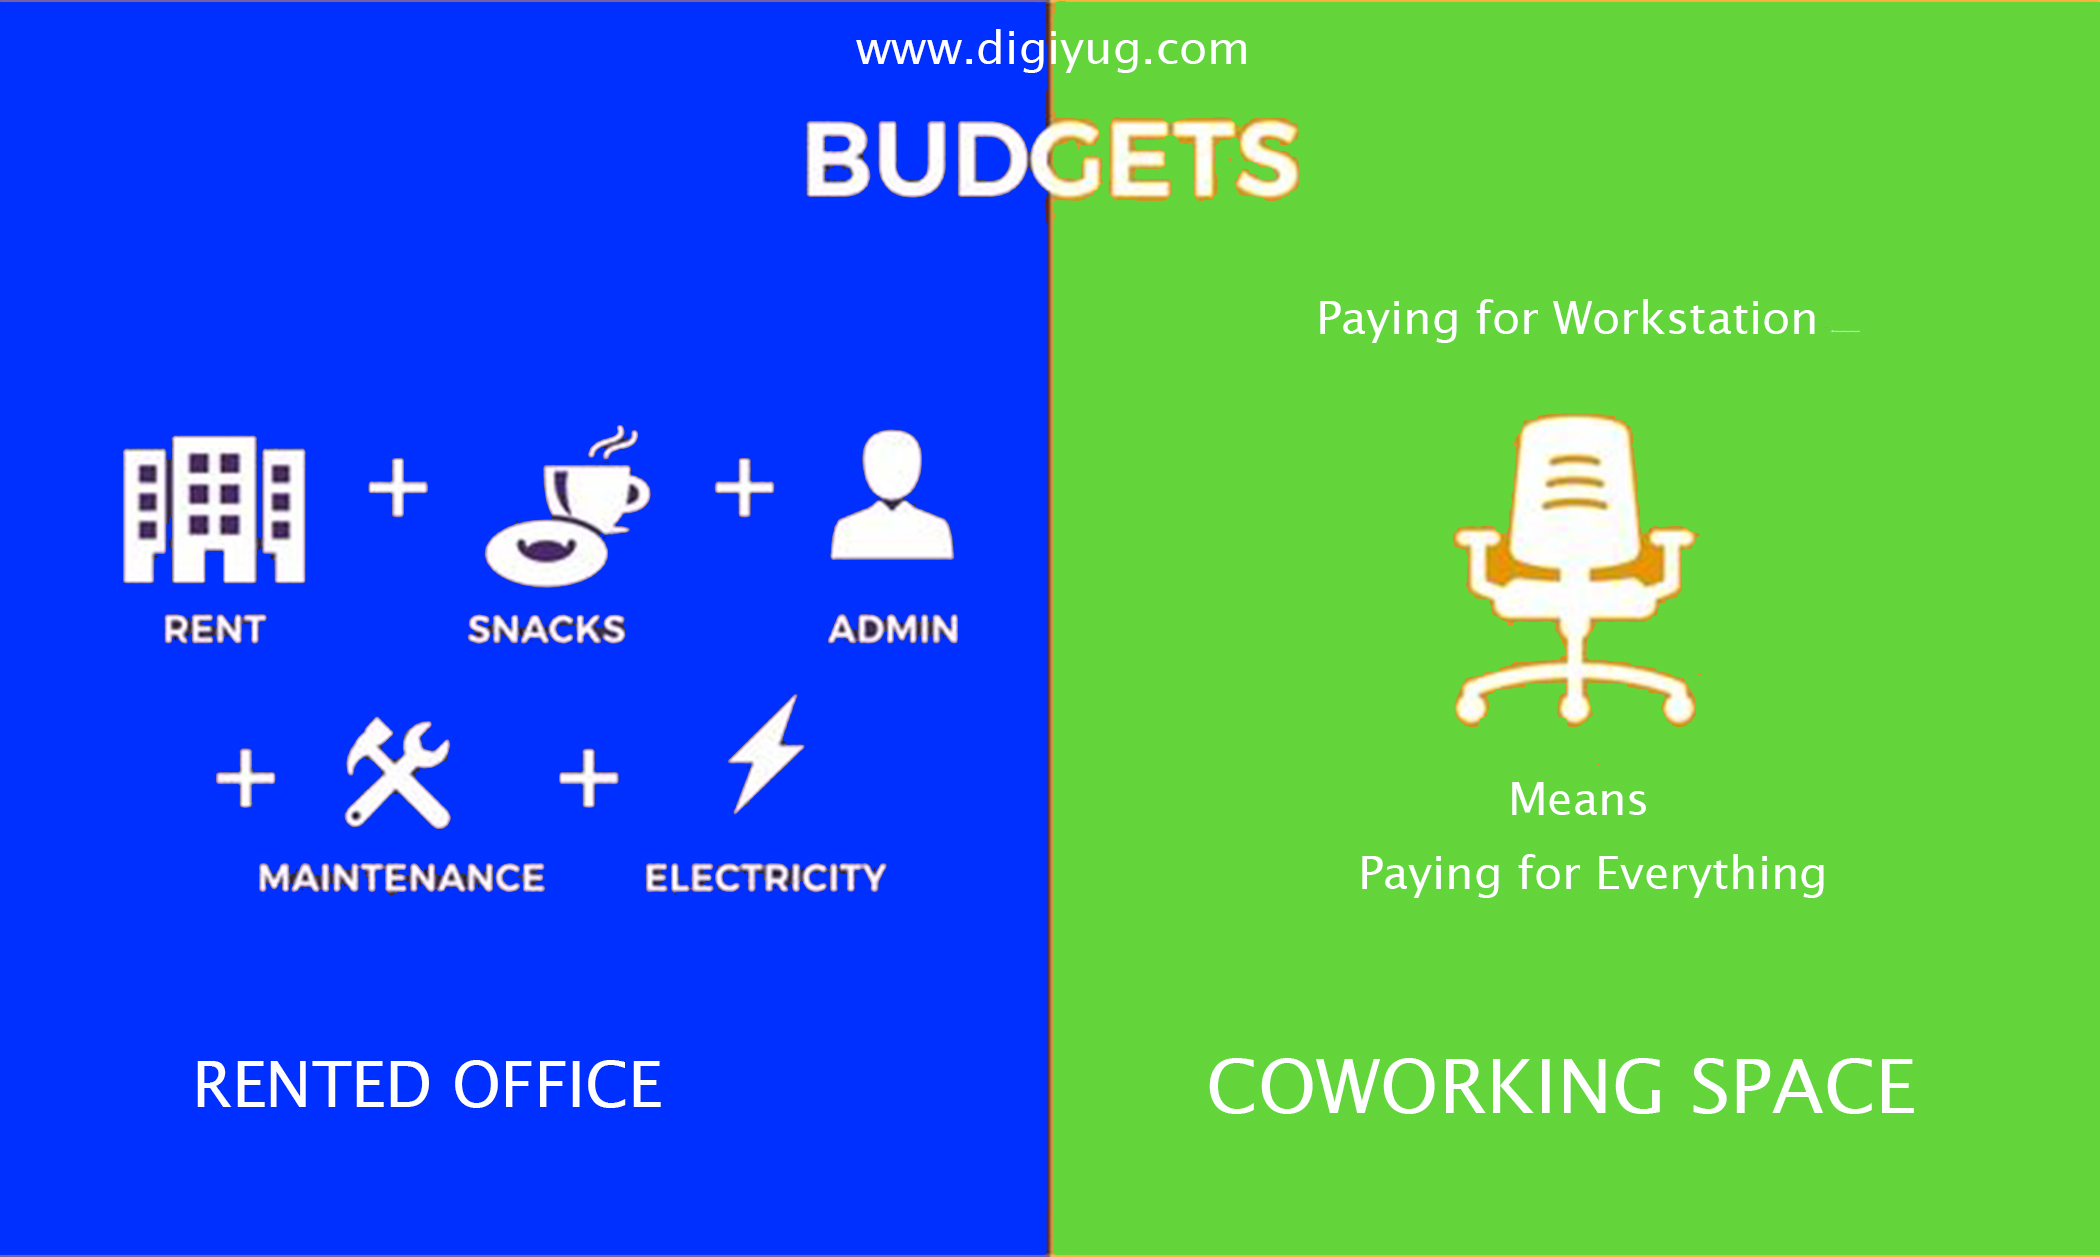 Benefits of coworking space